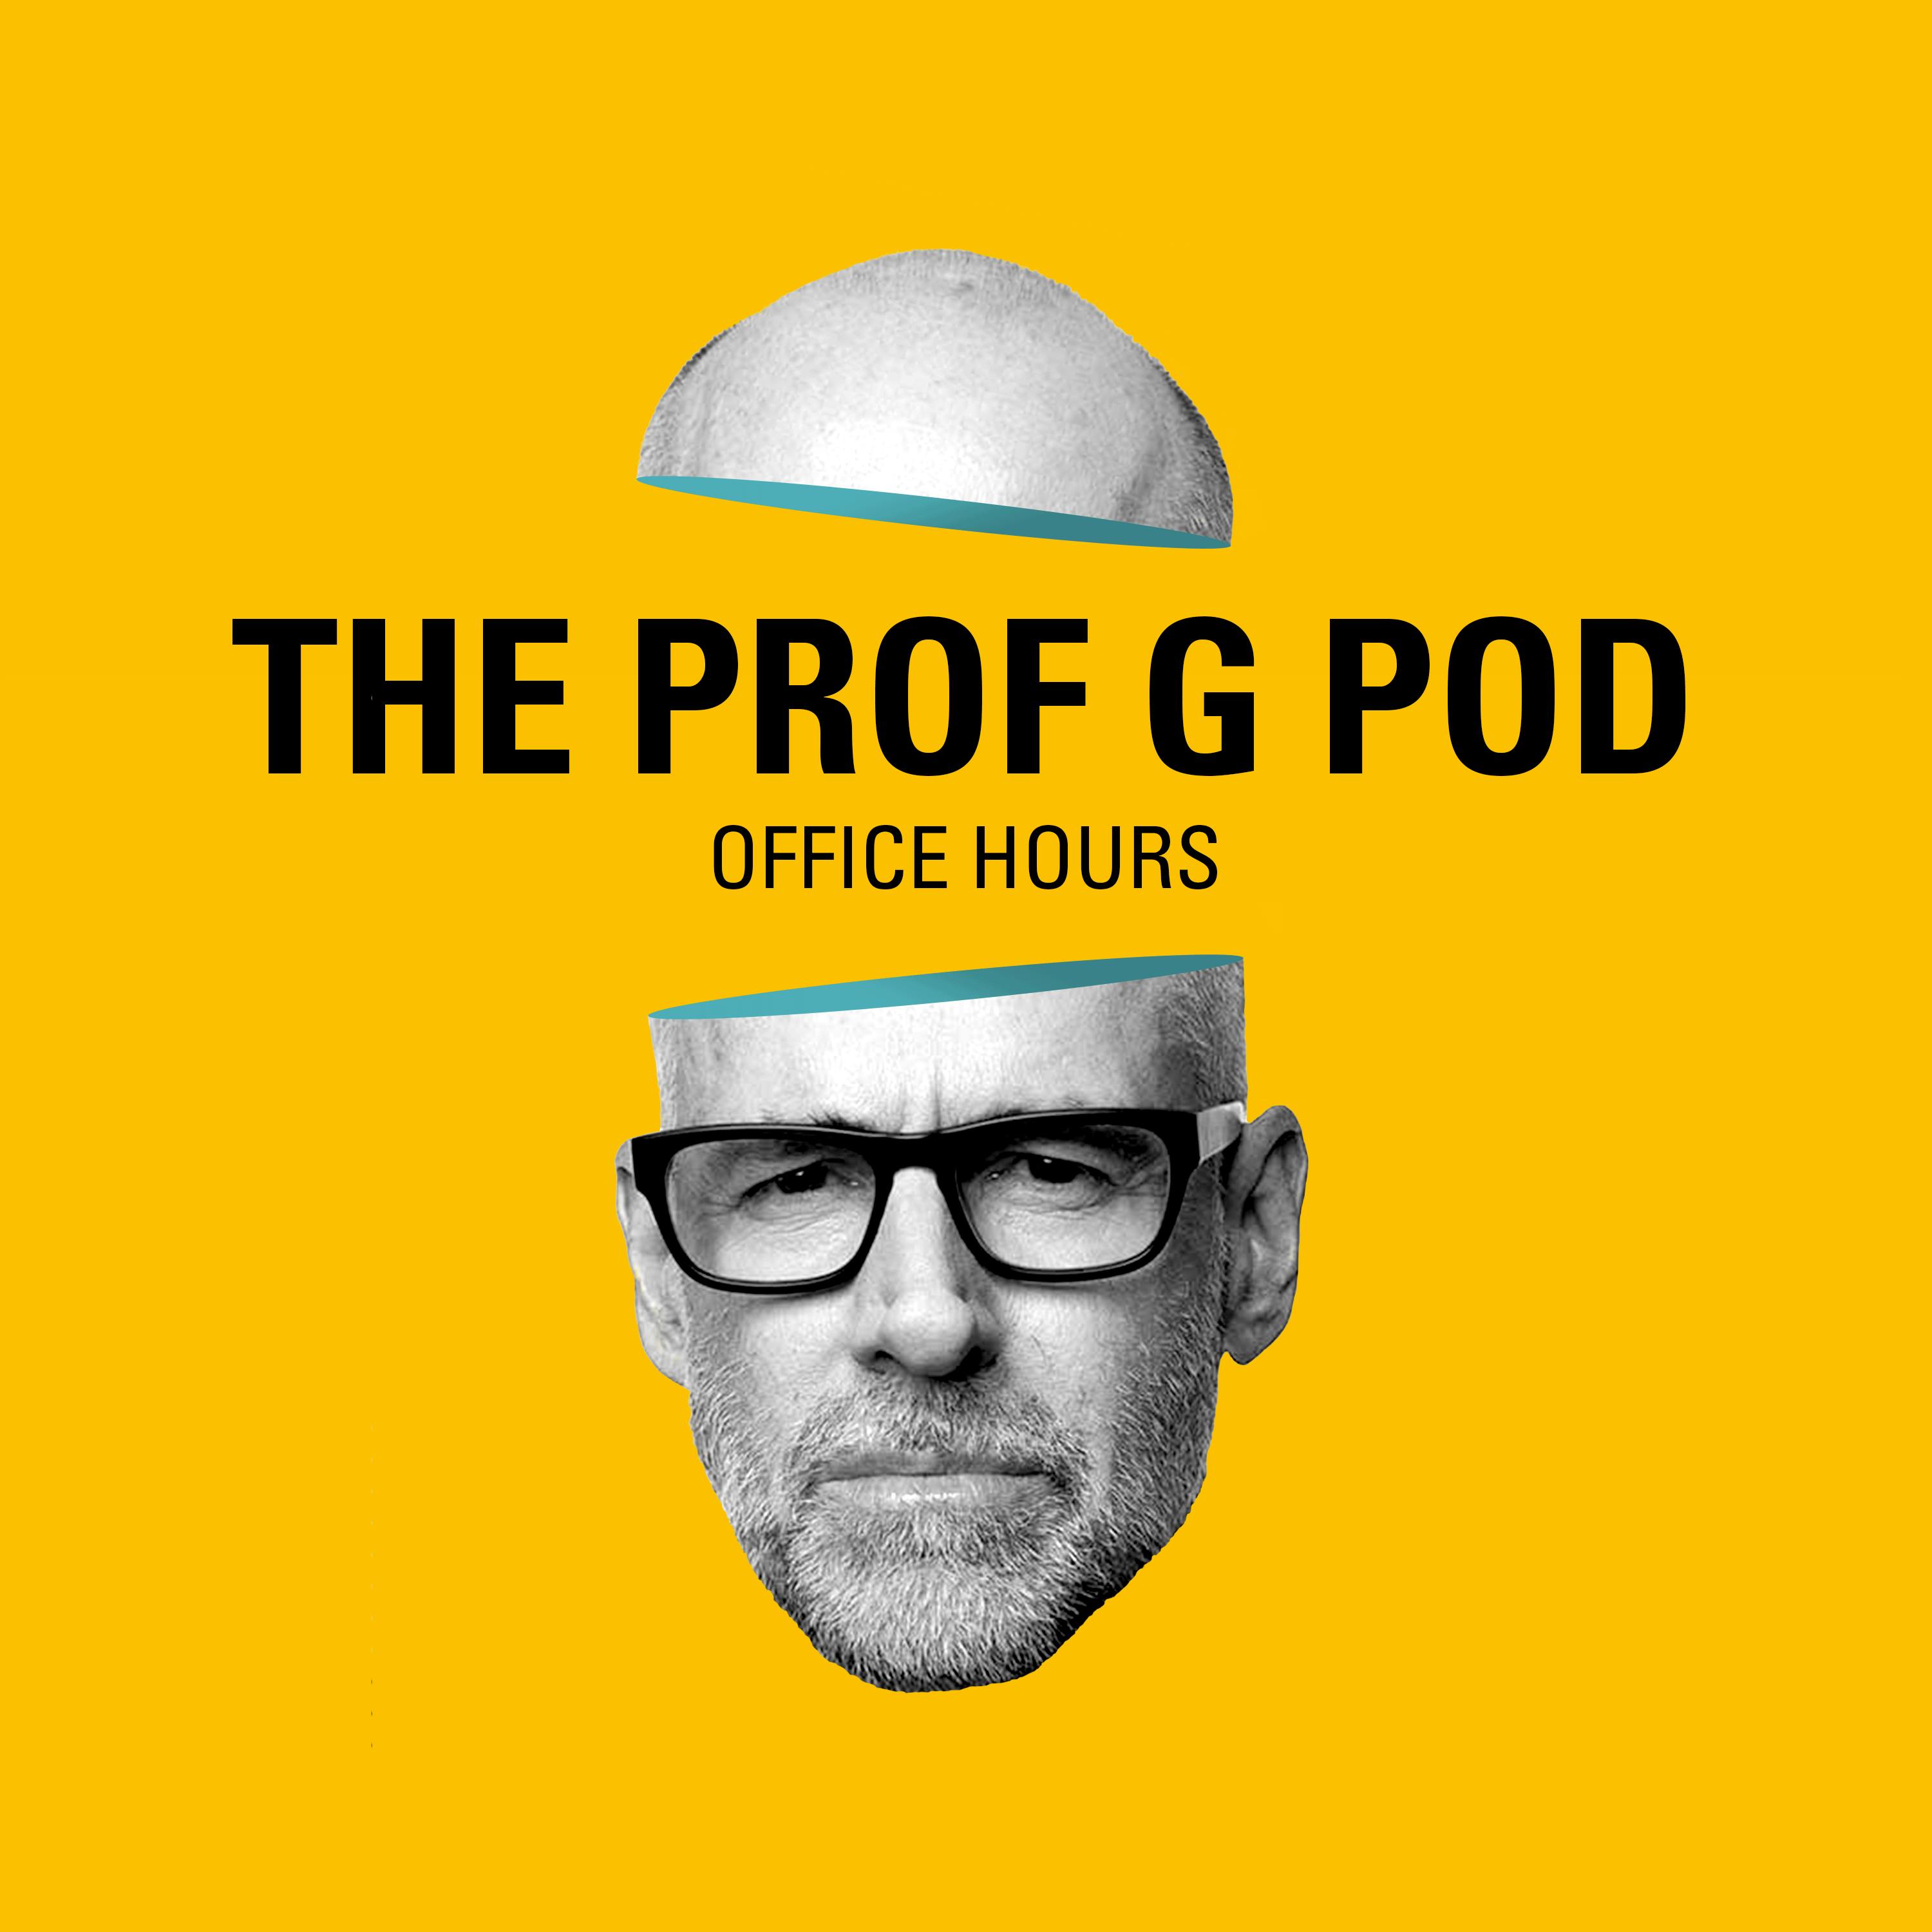 Office Hours: Are Fitness Brands the New Religion? The Tyranny of OPEC, and Fighting the Cost of Higher Ed by Vox Media Podcast Network